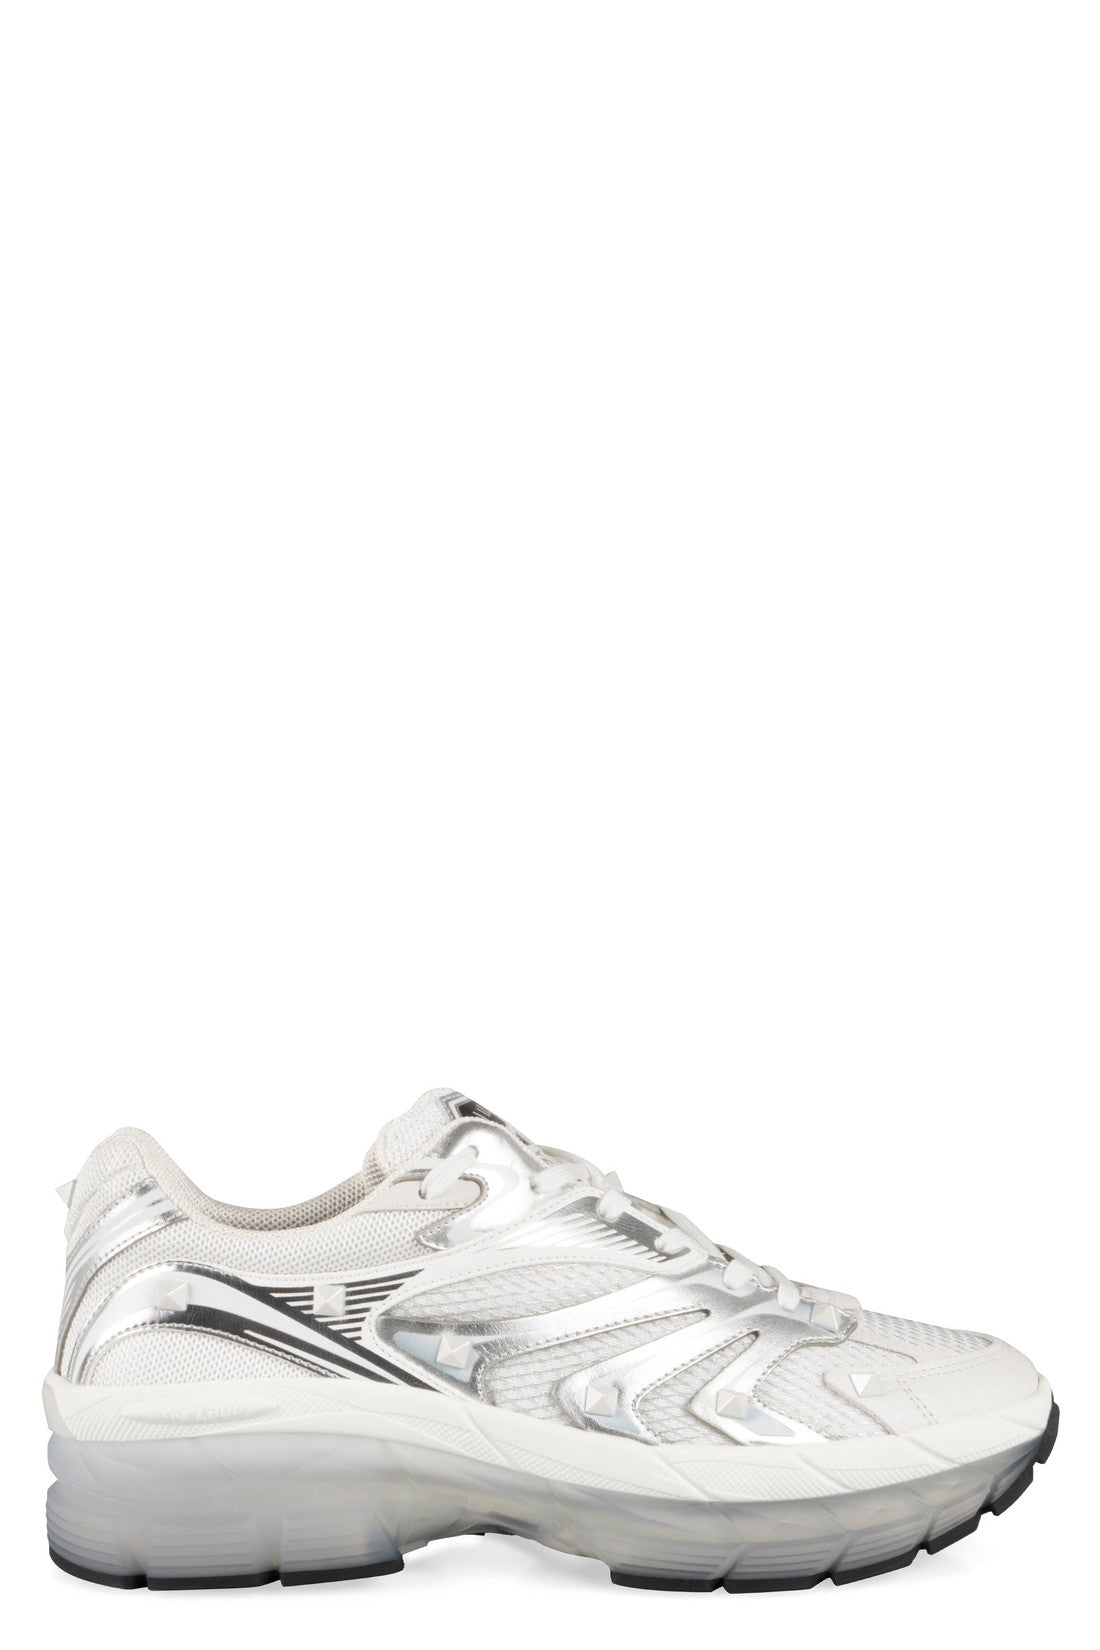 Valentino-OUTLET-SALE-Valentino Garavani - MS-2960 leather and fabric low-top sneakers-ARCHIVIST